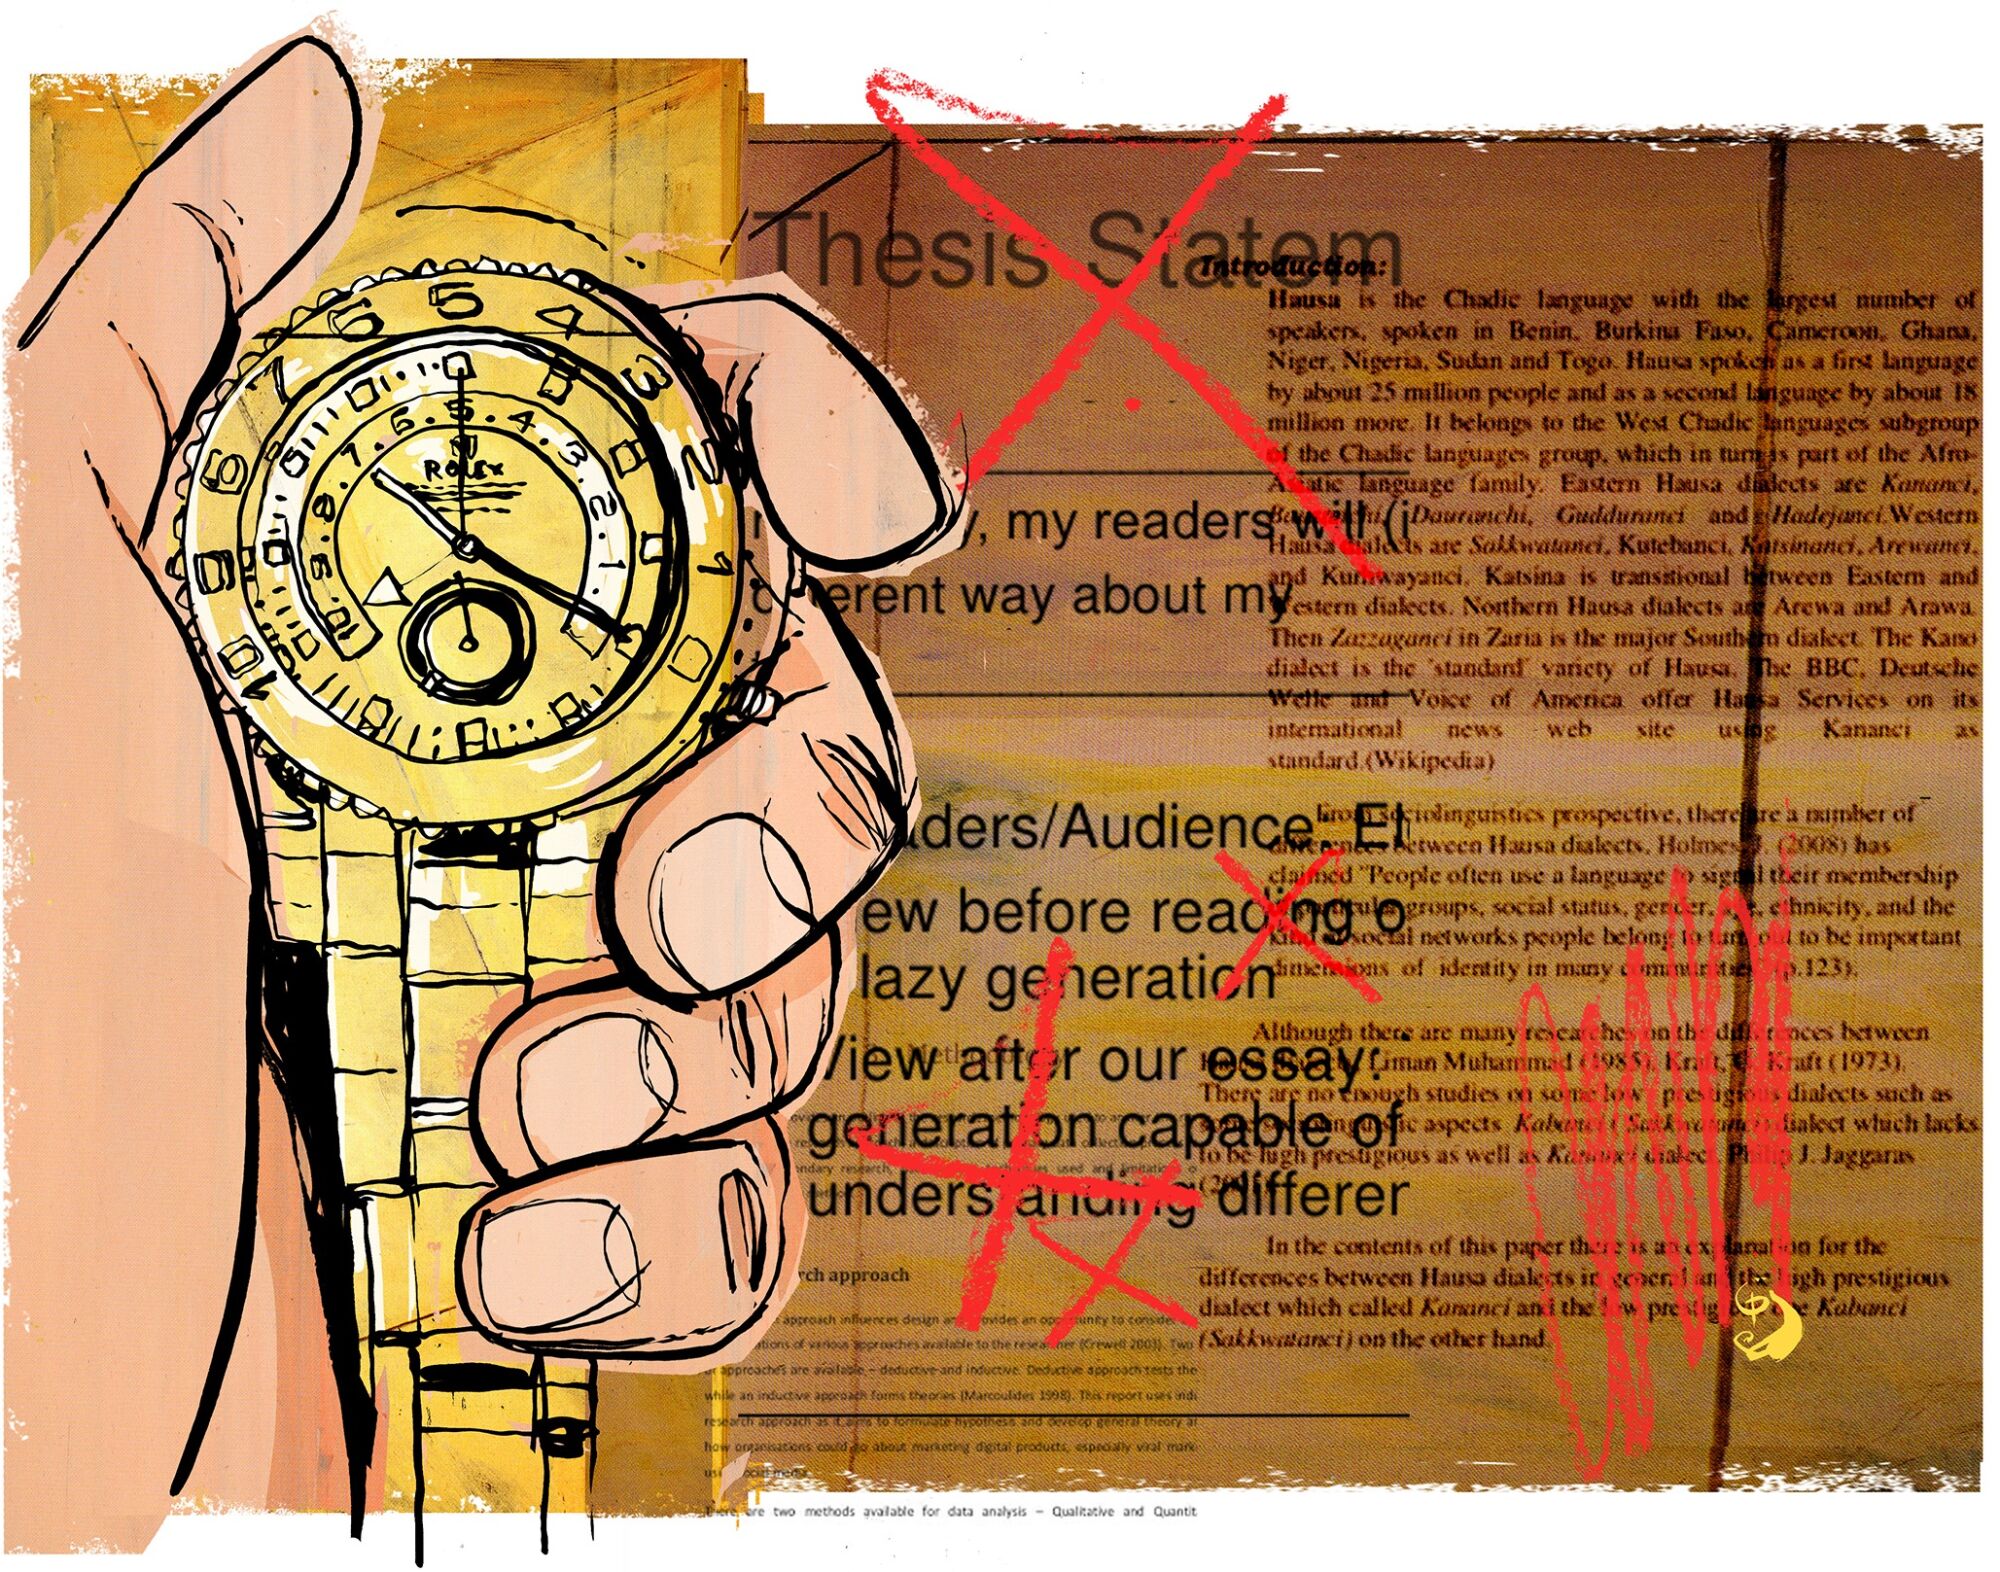 Illustration of a Rolex watch and academic papers.